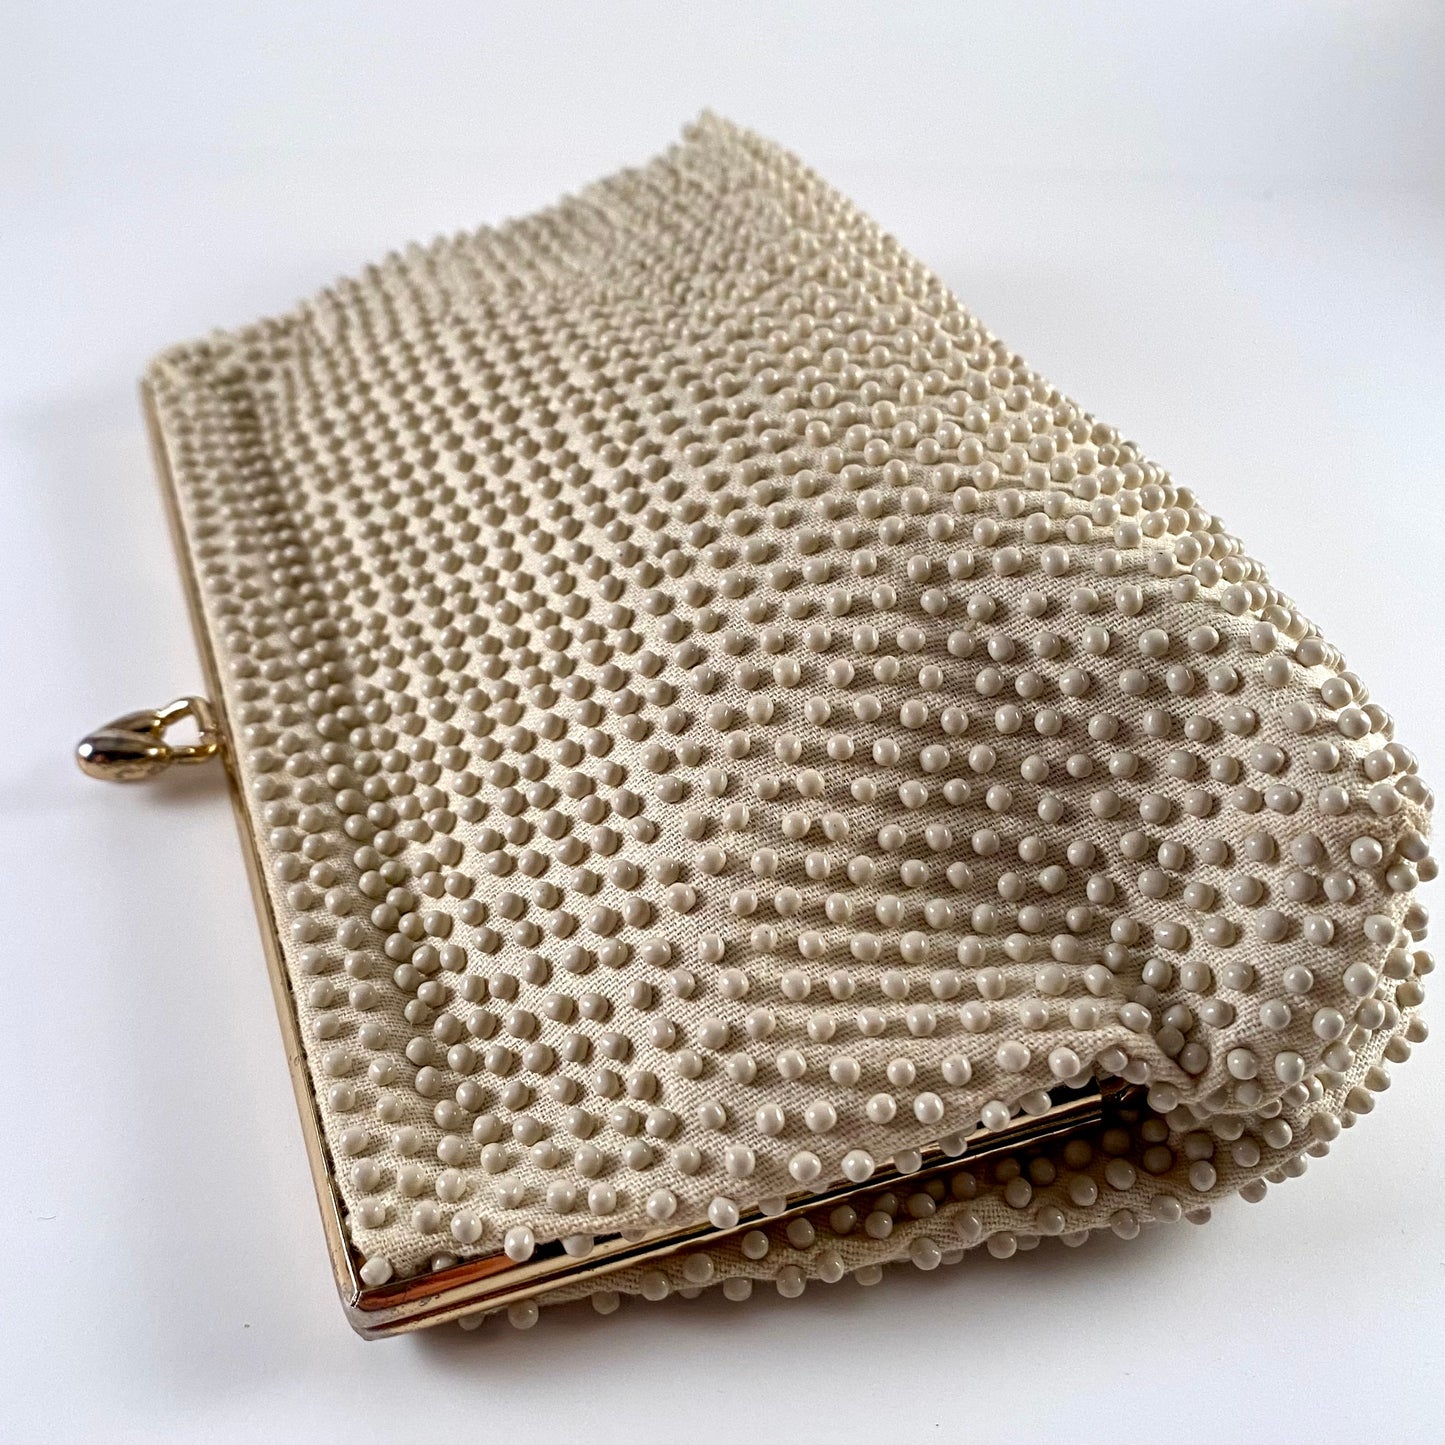 Late 50s/ Early 60s Lumured Ivory Beaded Clutch